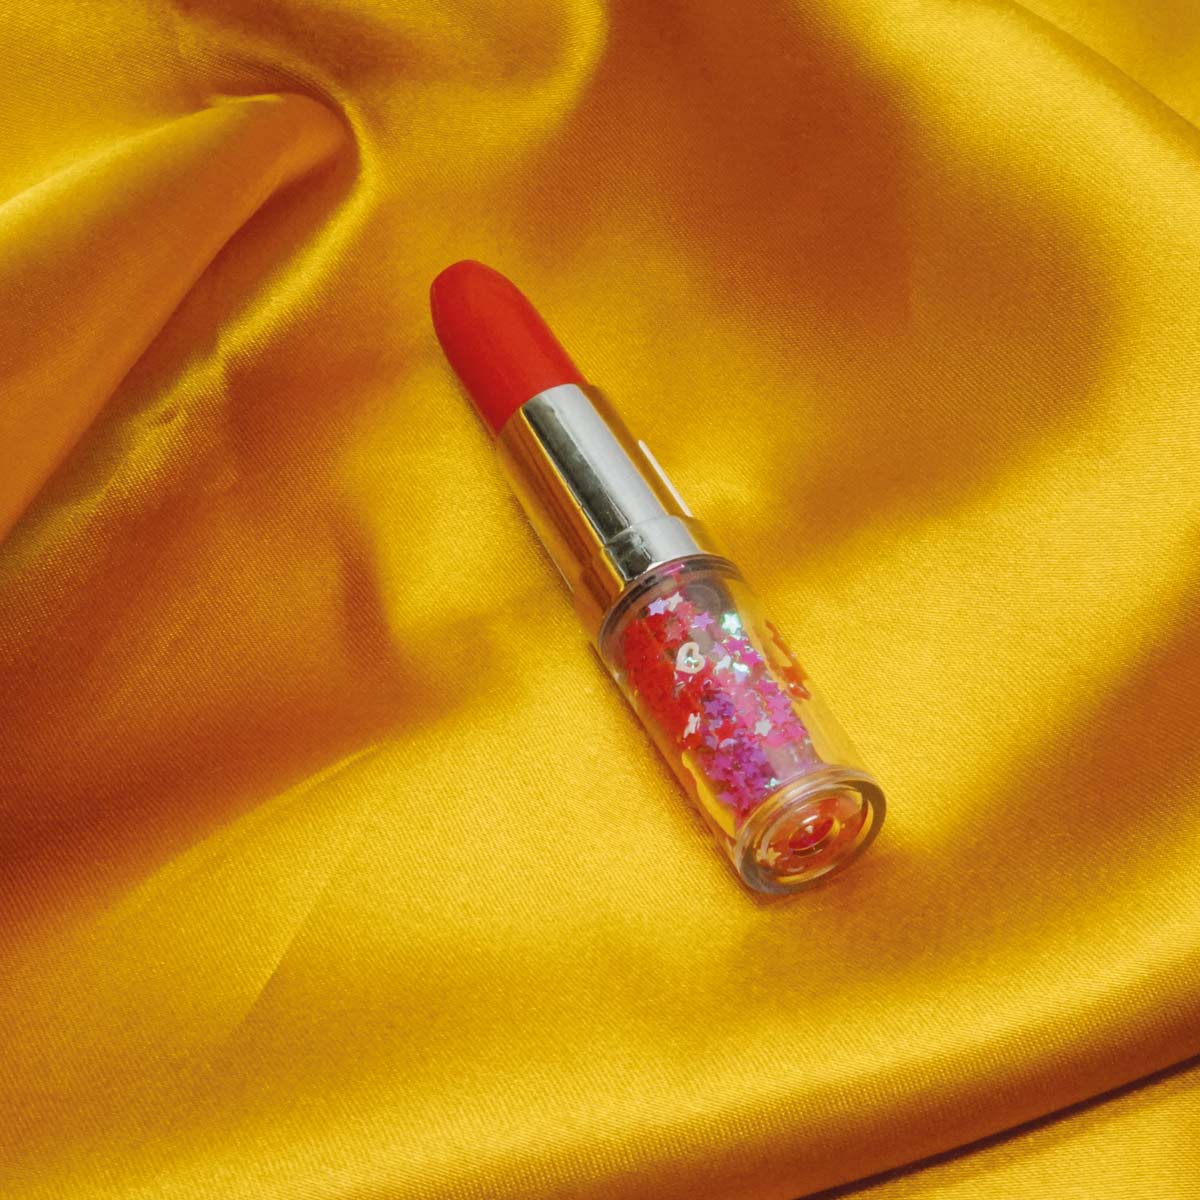 penhouse.in Attractive Red Color Body  With Star Design Glitter Lipstick Shape Cap Type Toy Gel Pen SKU 55010